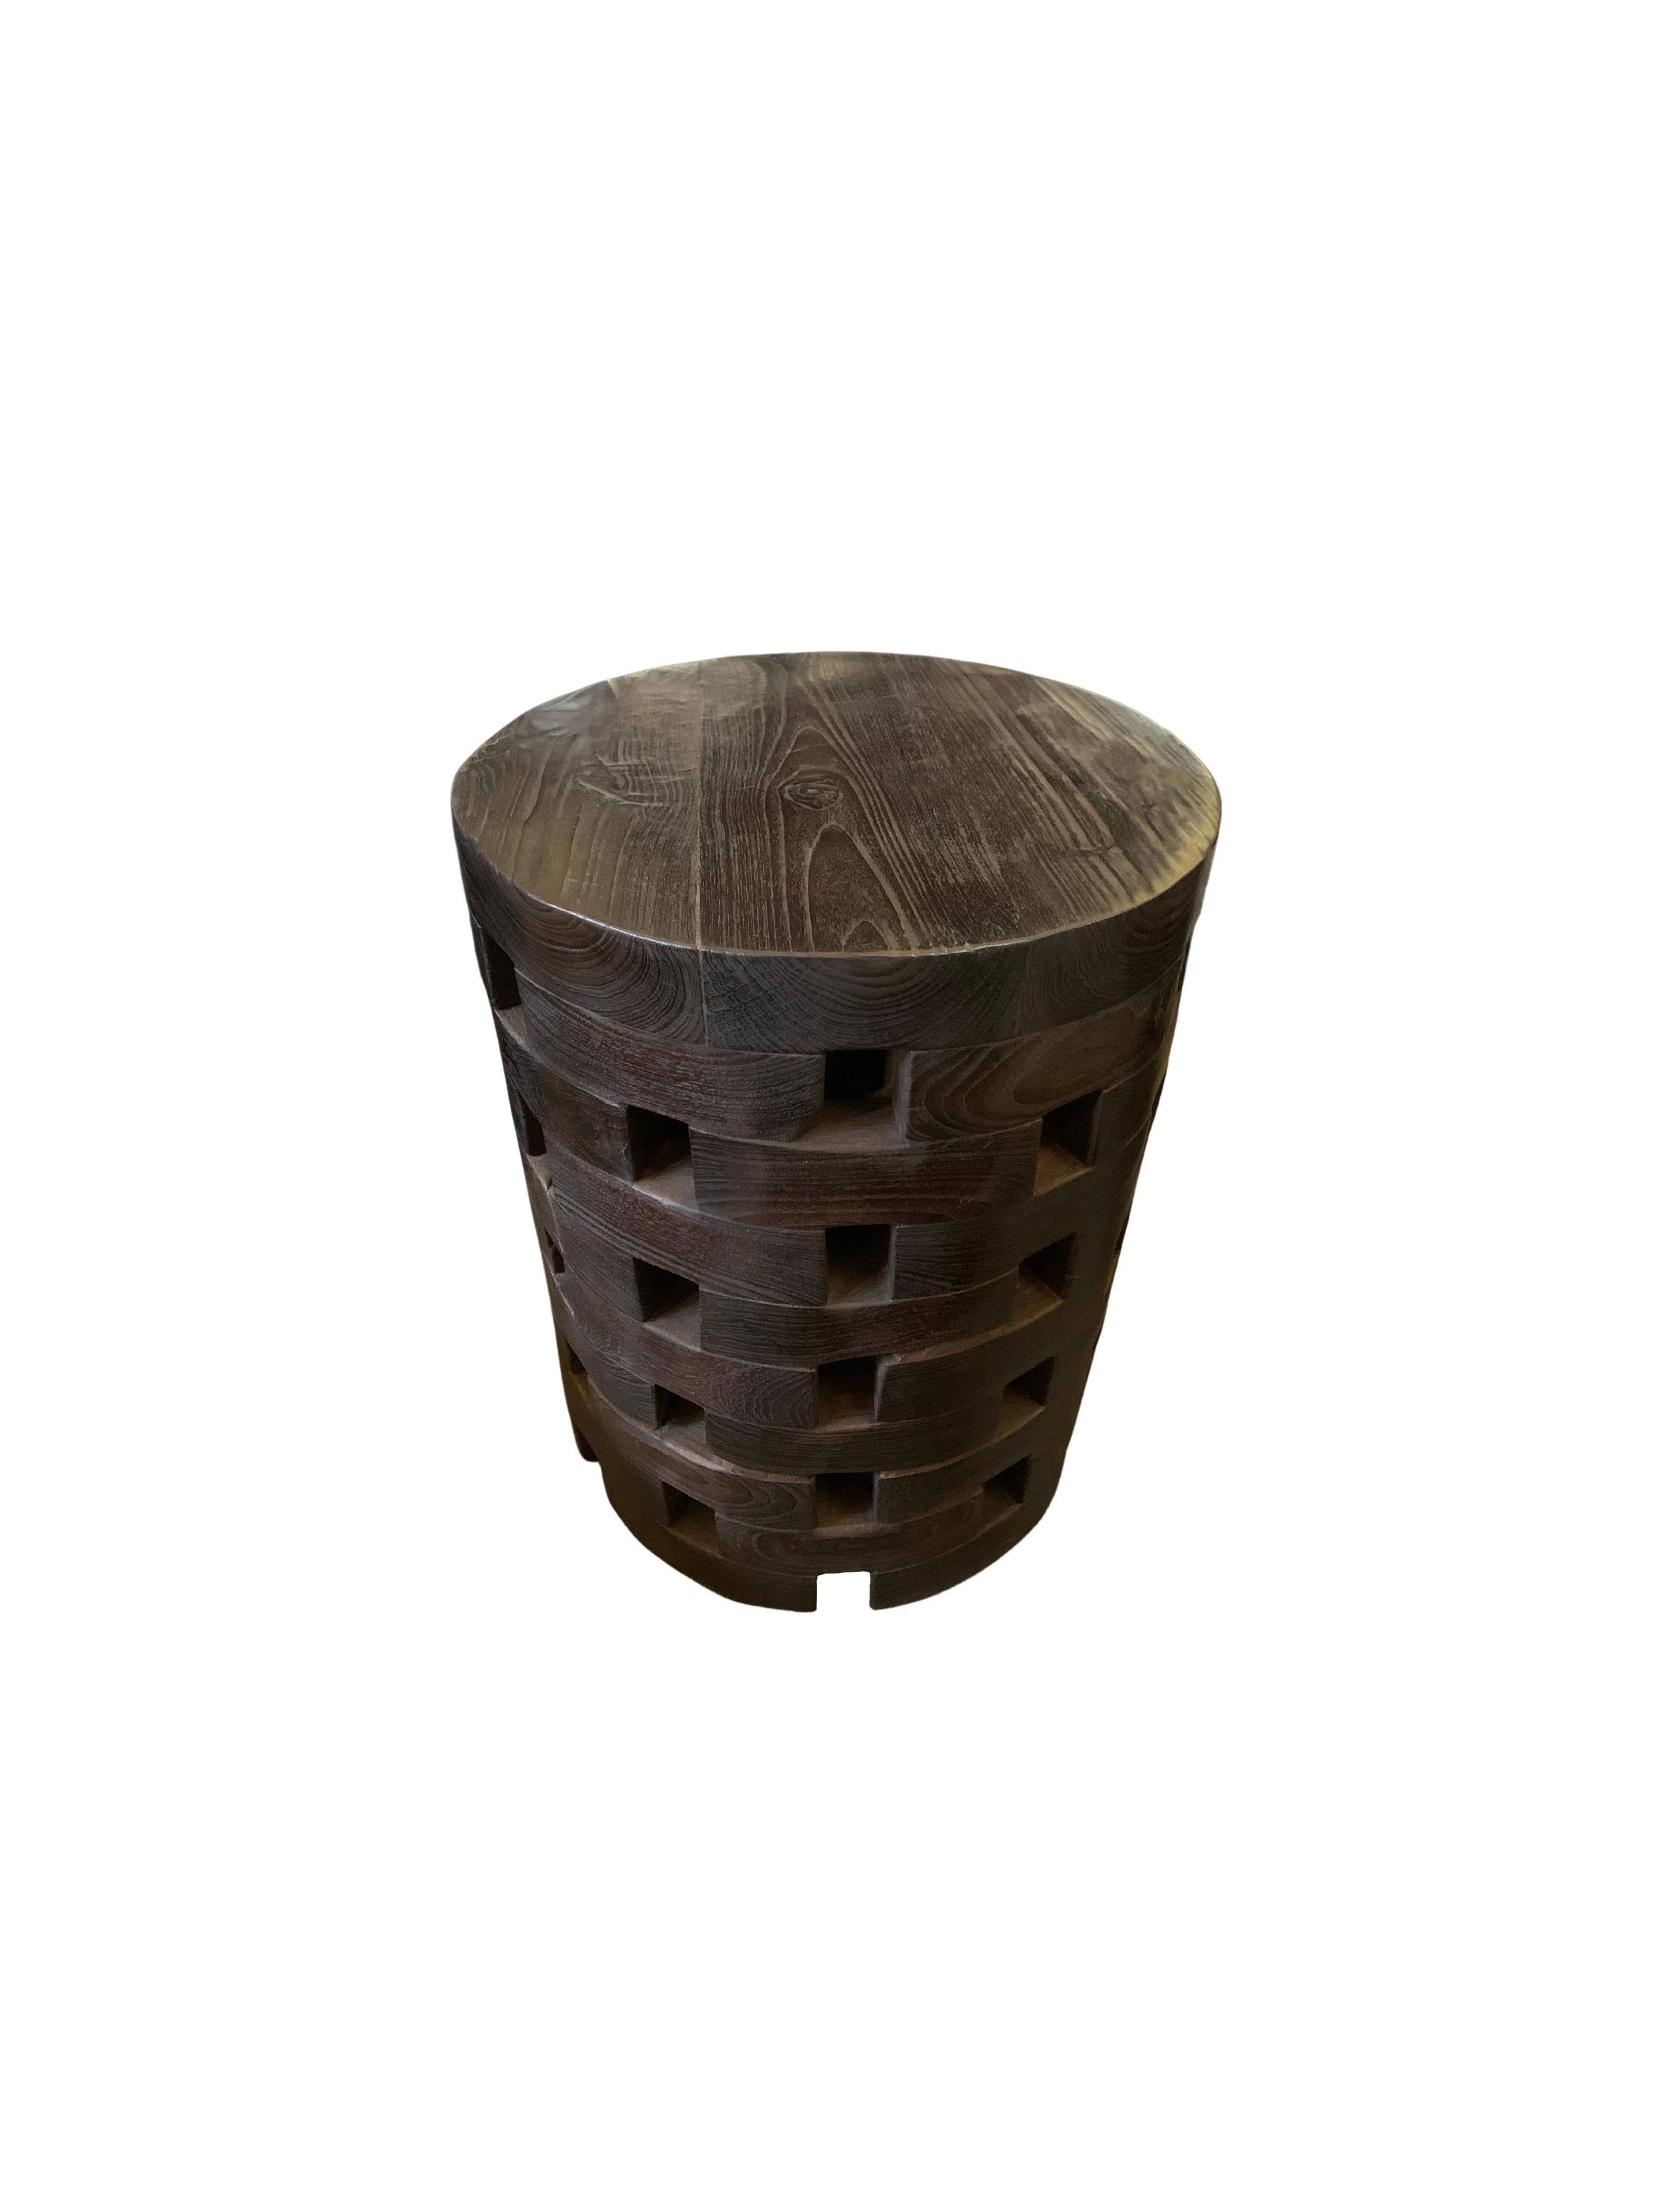 Organic Modern Sculptural Side Table, Solid Mango Wood, with Dark Lacquered Finish For Sale